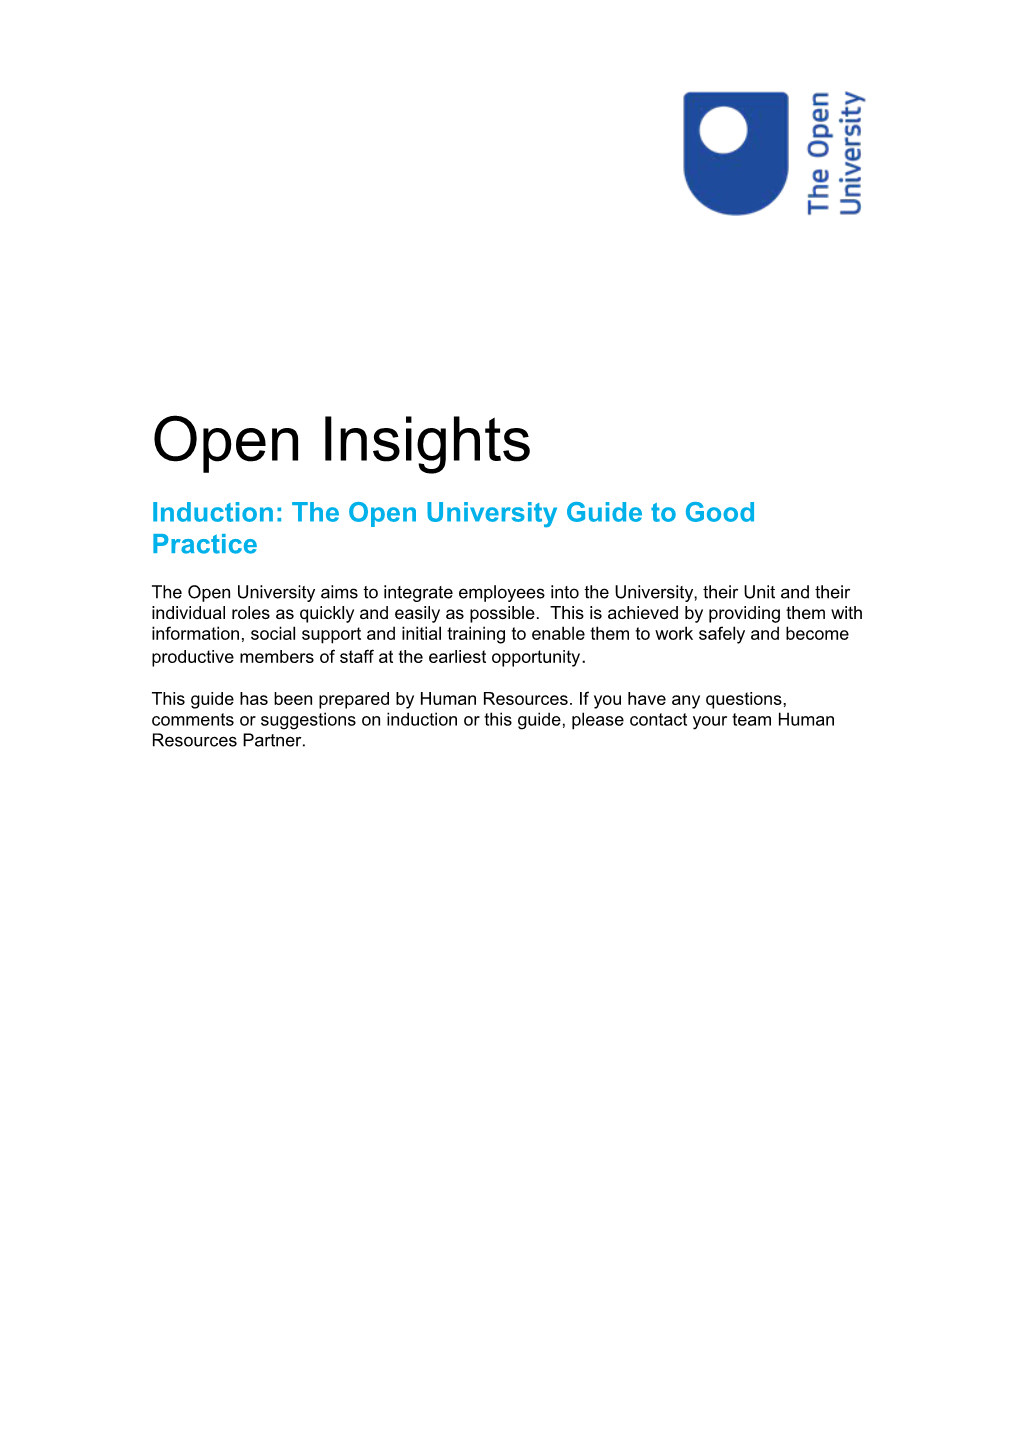 Open Insights Induction the Open University Guide to Good Practice HRG175